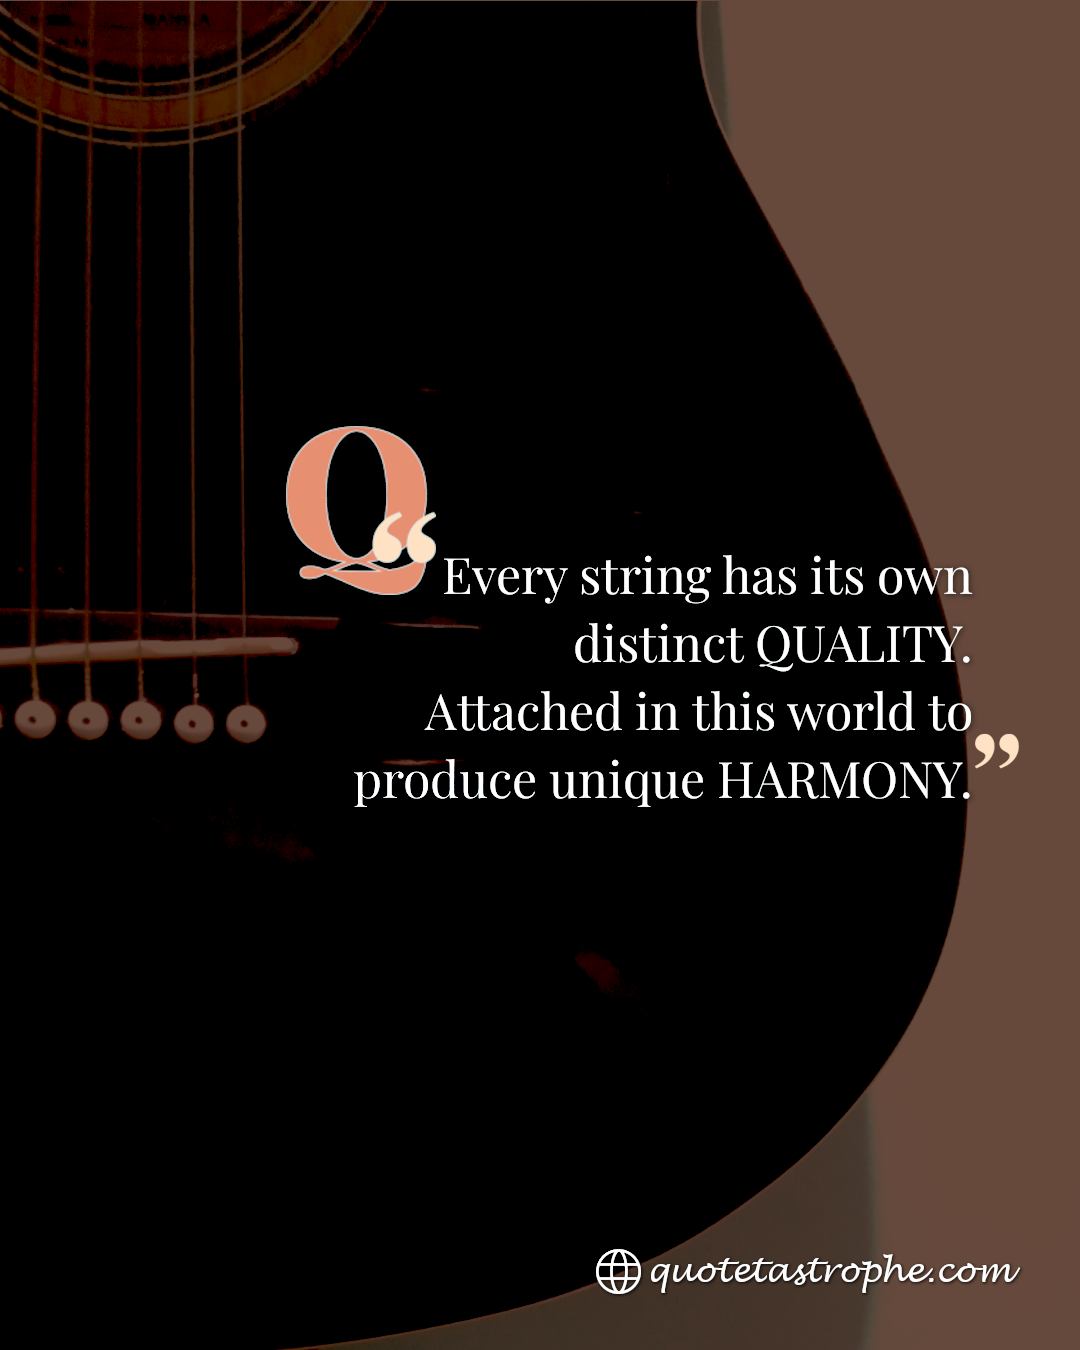 Every String Has Its Own Distinct Quality & Uniqueness